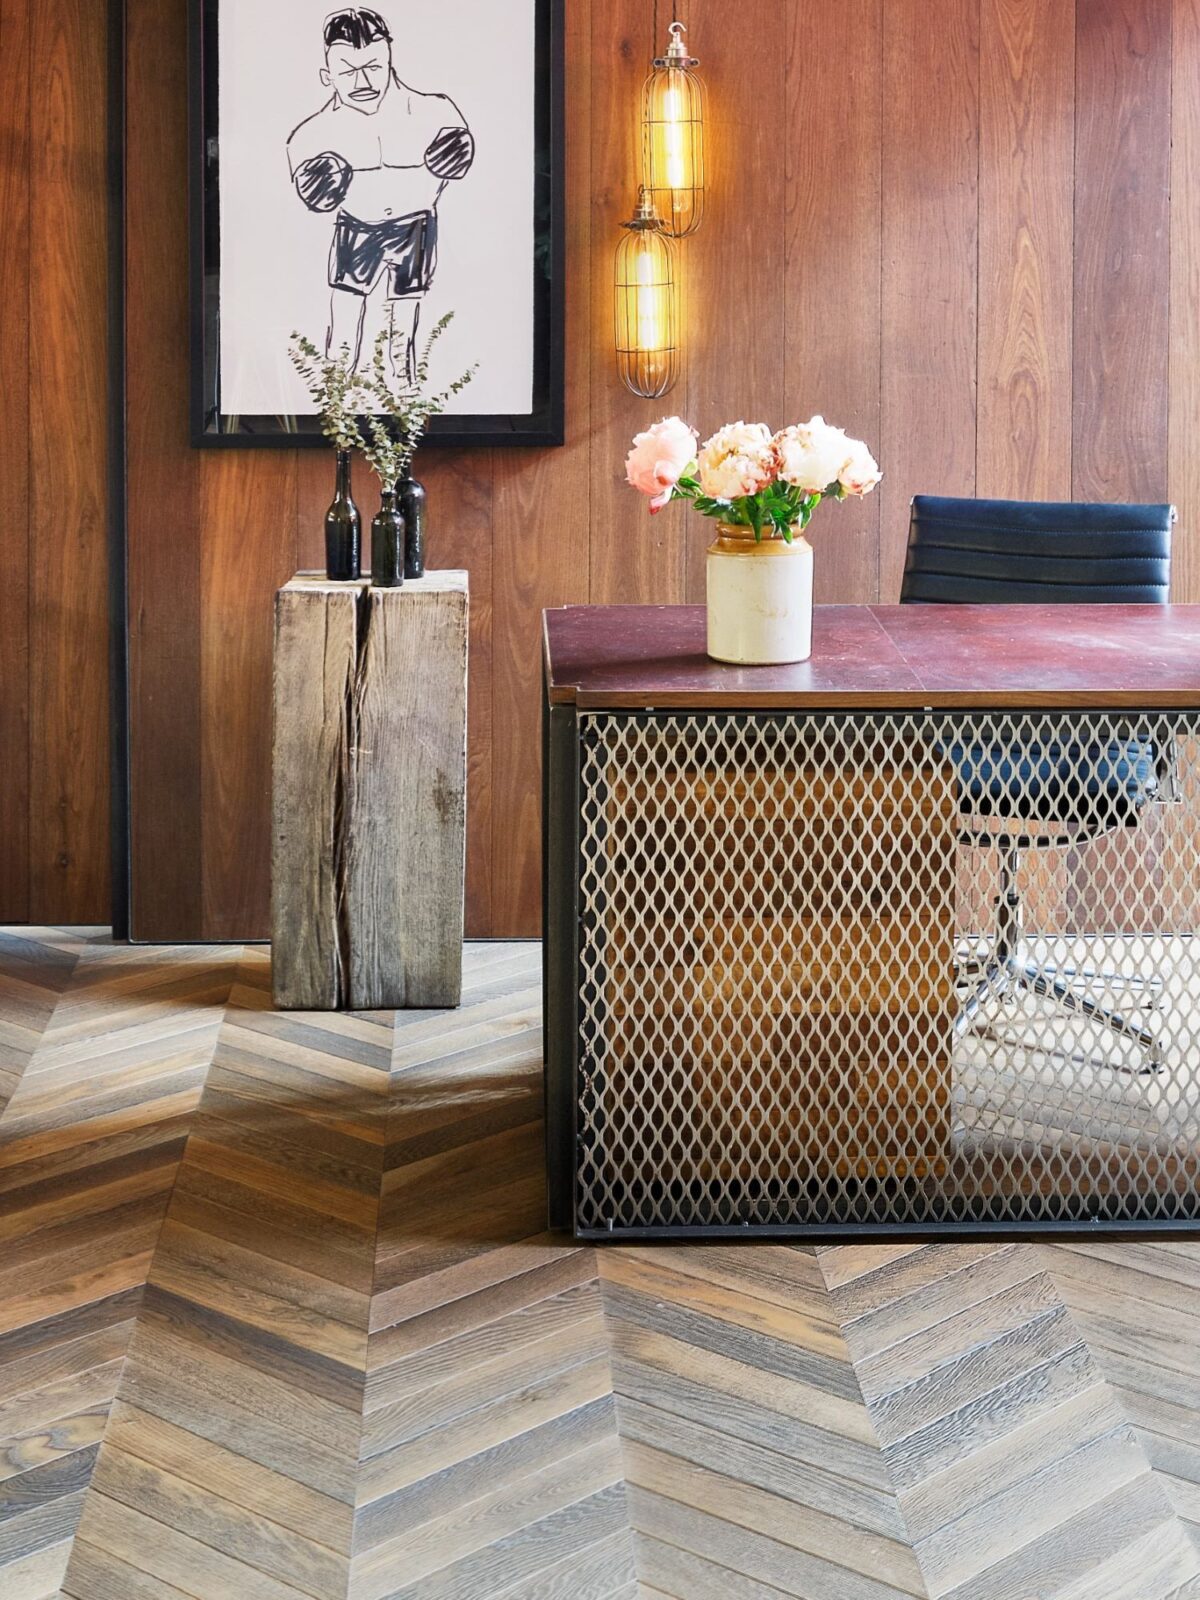 Oak landmark compton in chevron parquet pattern with desk and print by stephen anthony davids